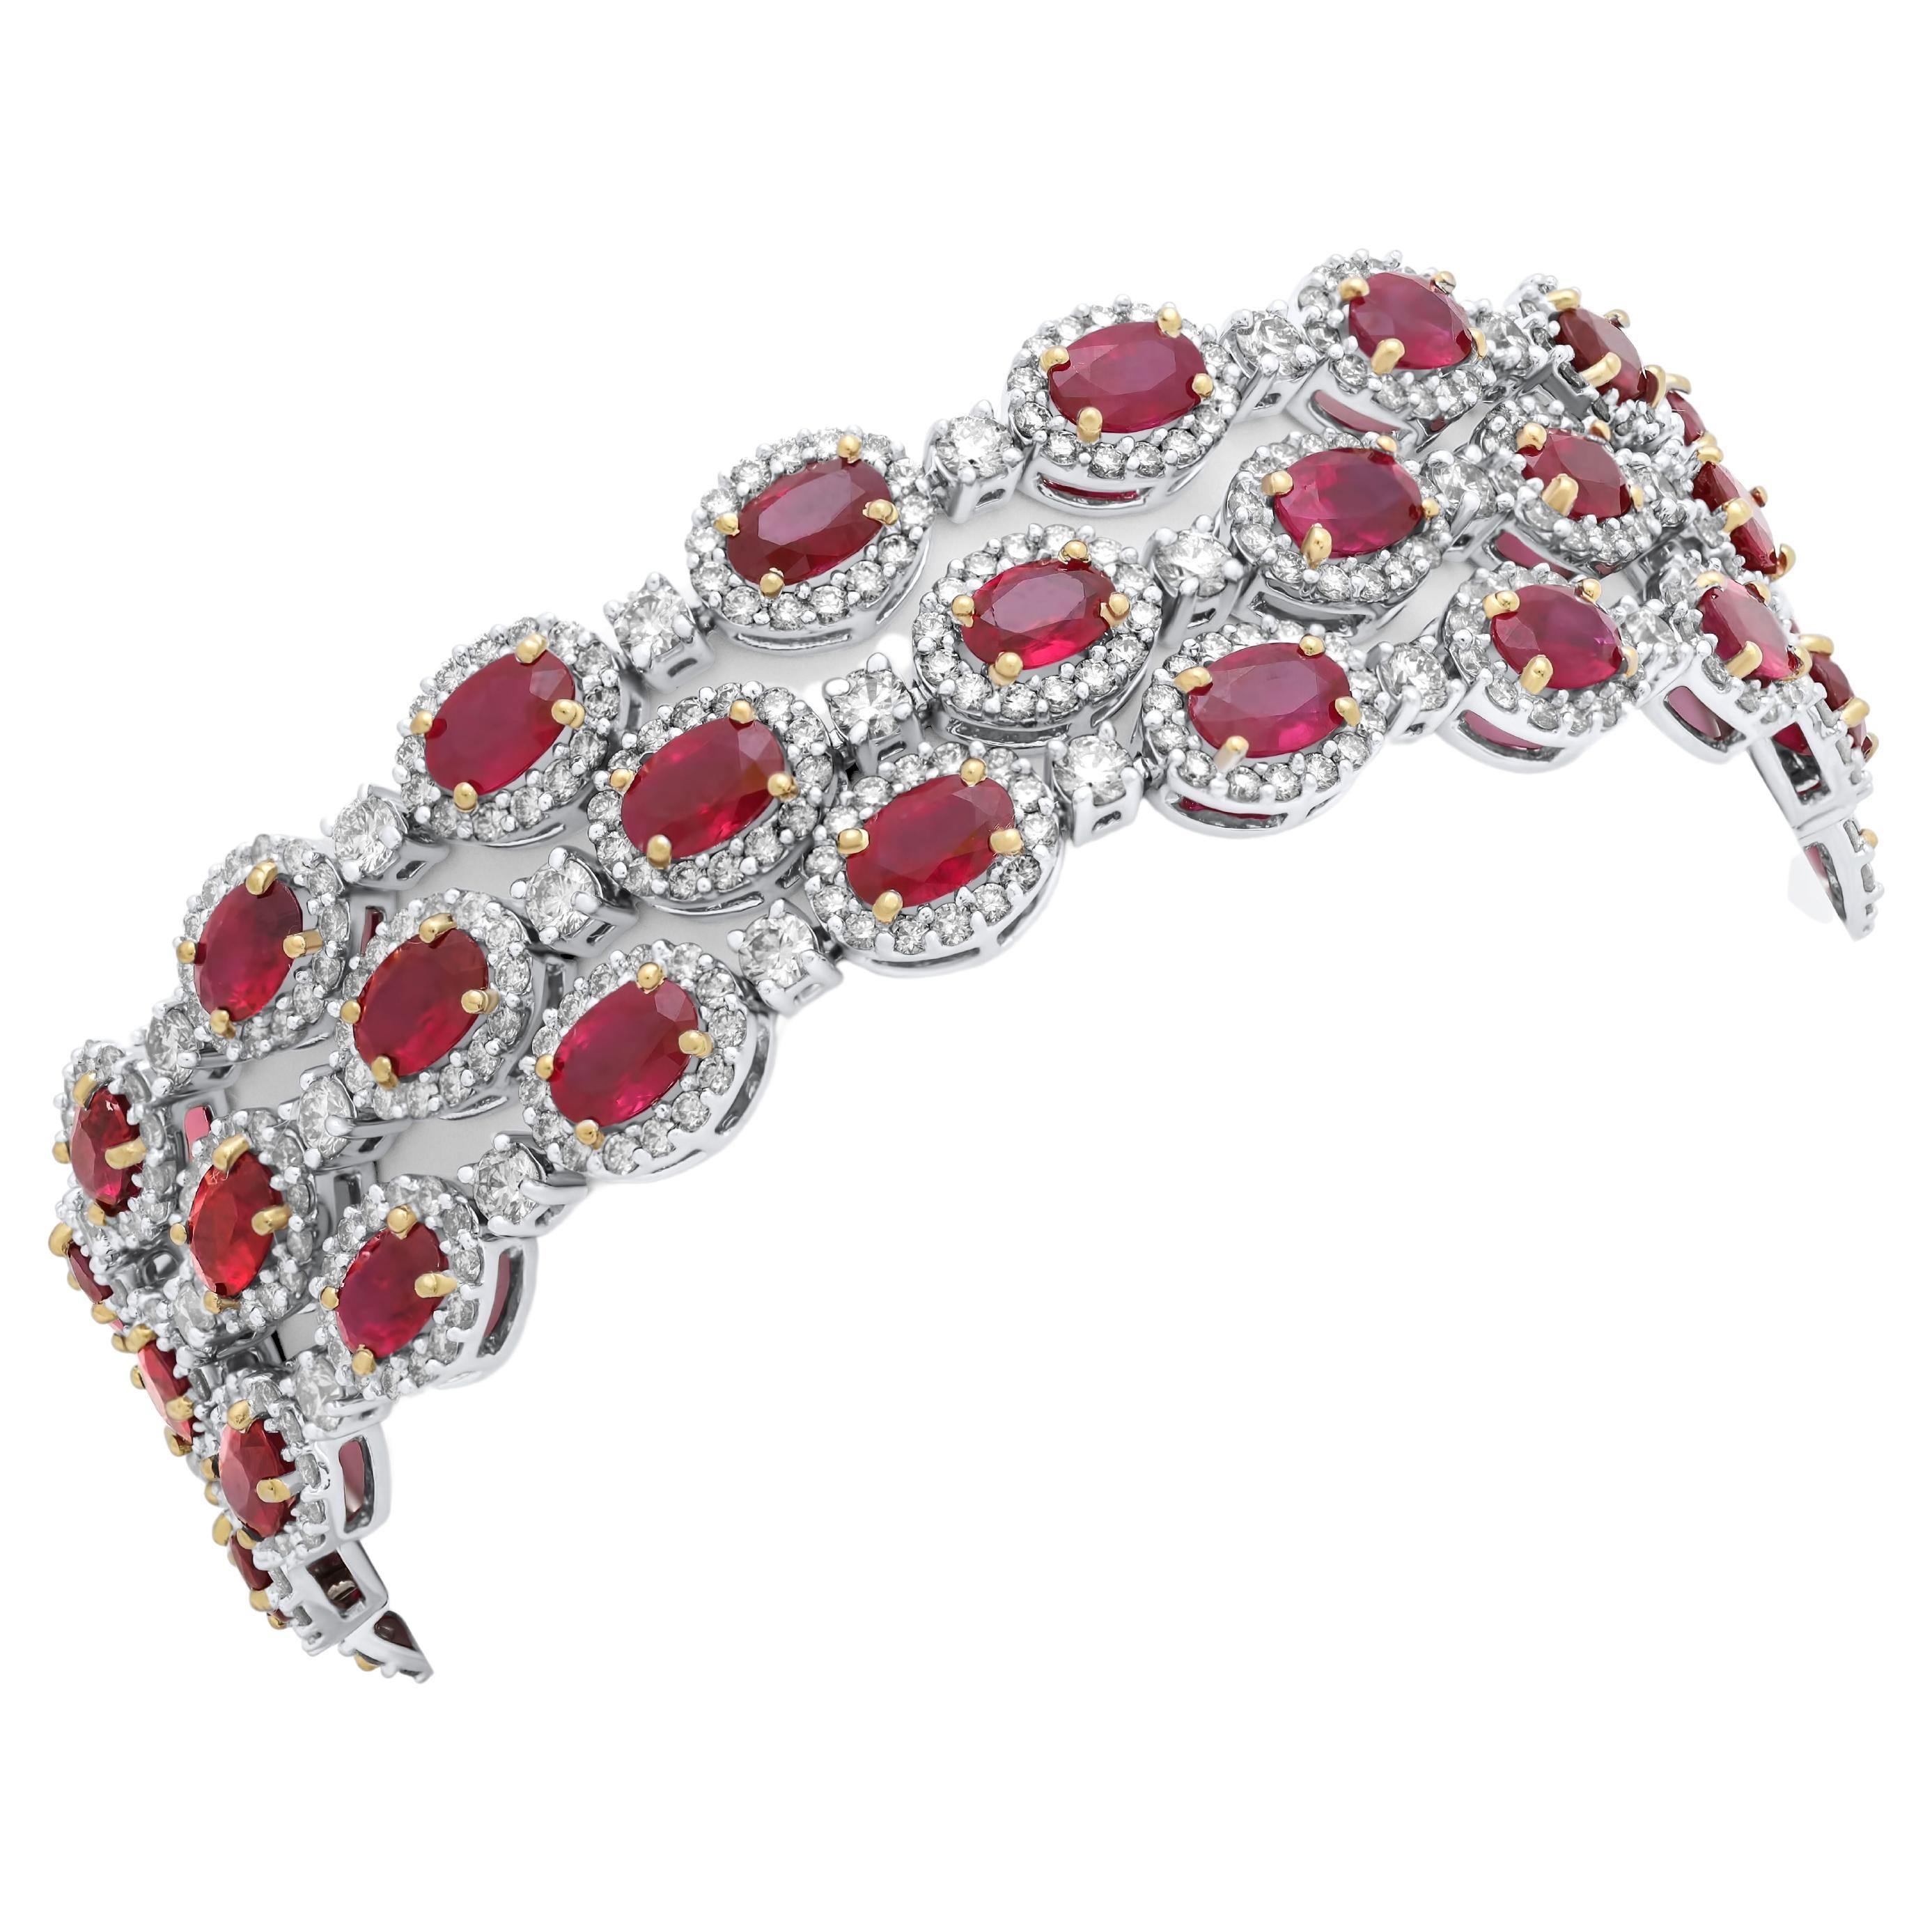 Diana M. 28.00 Carat Ruby and Diamond Bracelet in White Gold For Sale